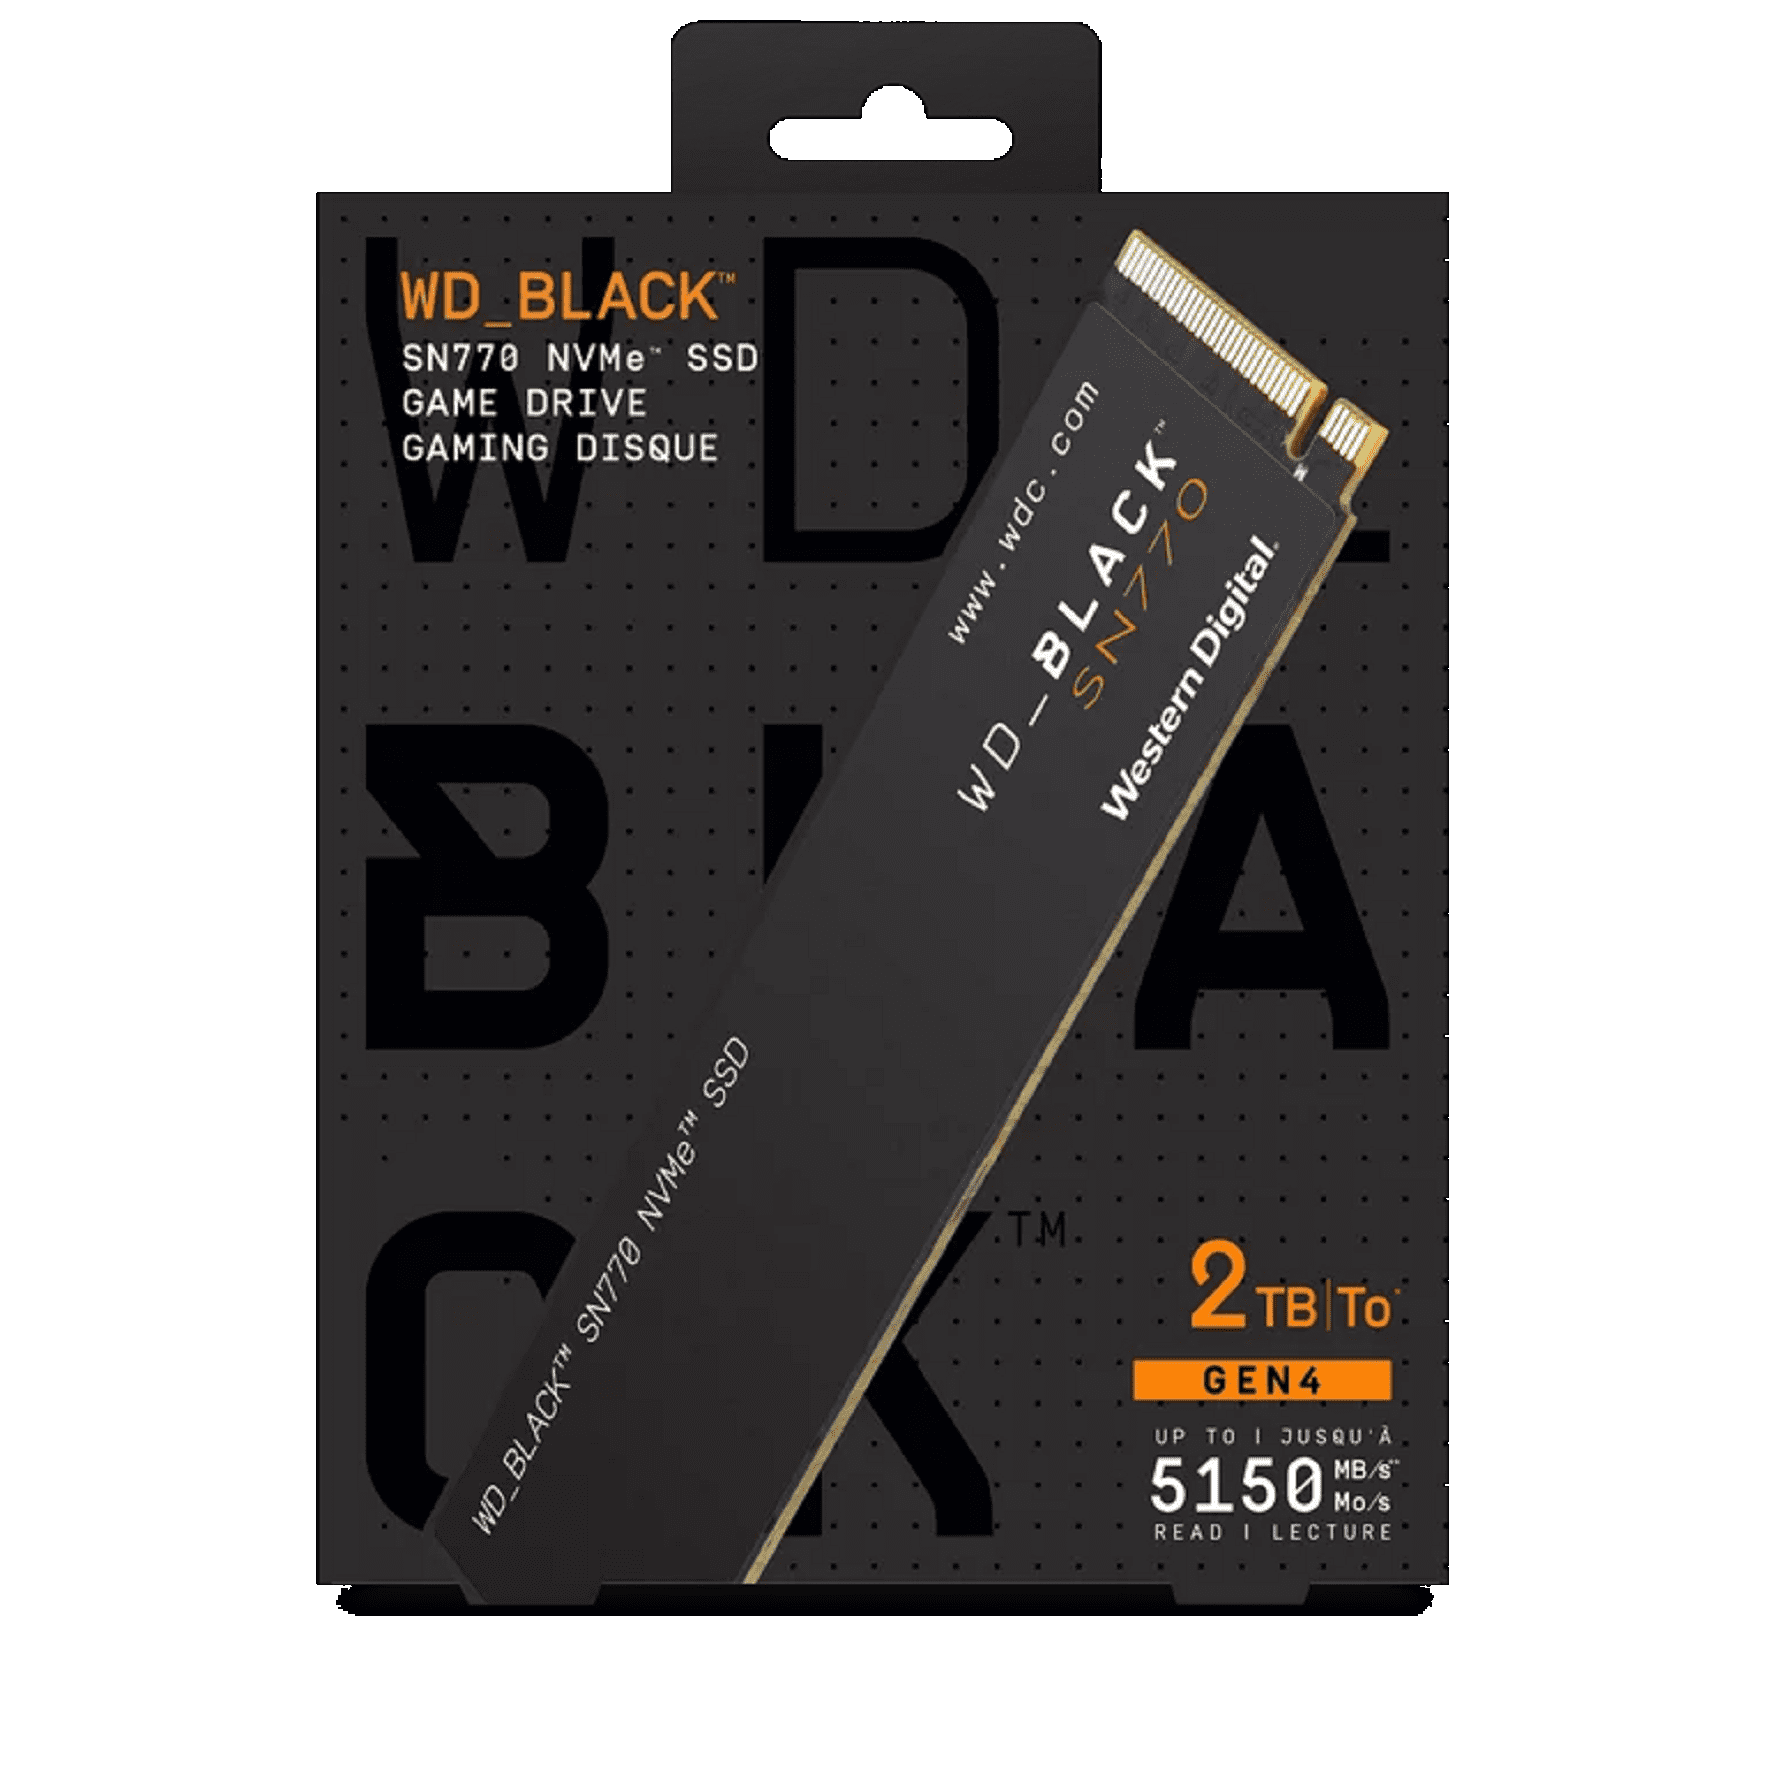 up Solid Internal 2280, WDBBDL0010BNC- SSD , WD Drive Gaming SN770 - 5,150 PCIe - MB/s WRWM State M.2 Black Gen4 1TB to NVMe